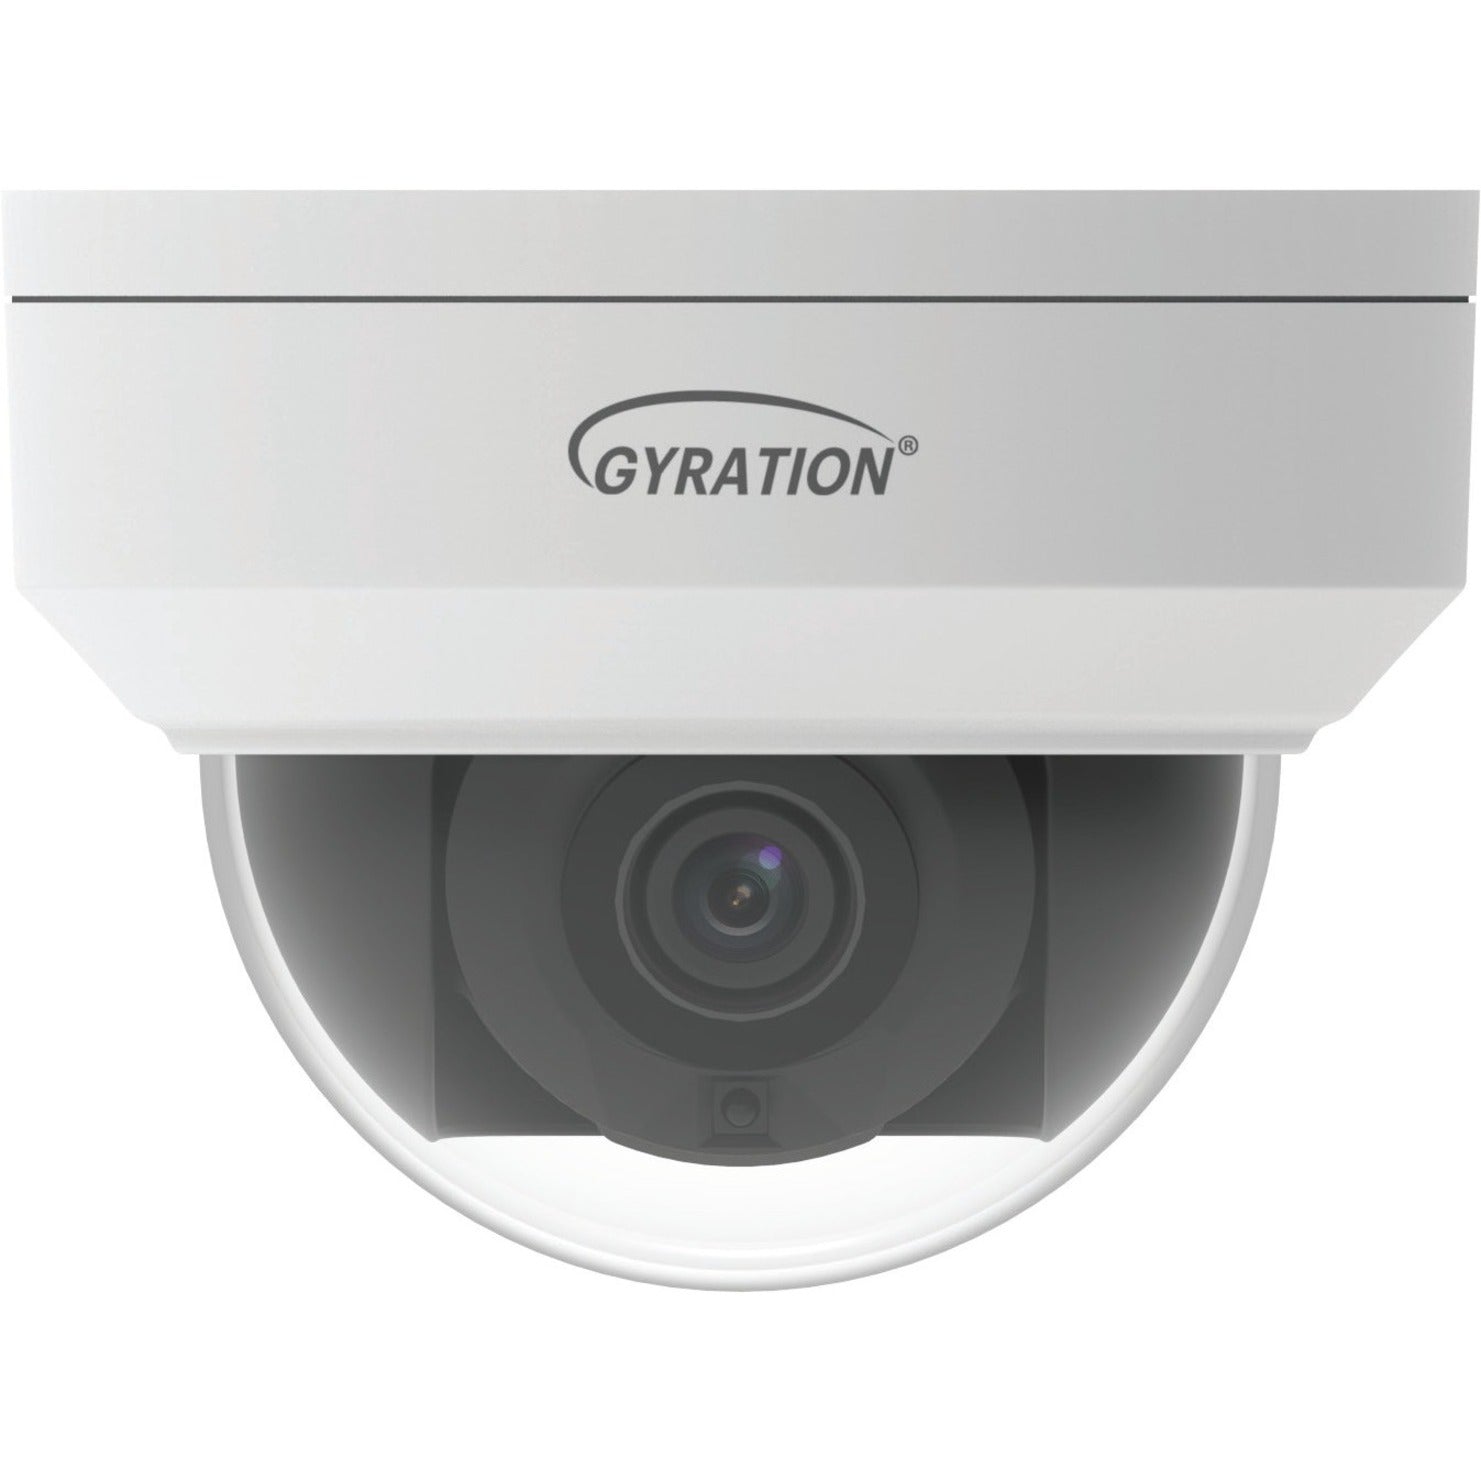 Gyration CYBERVIEW 400D 4 MP Outdoor IR Fixed Bullet Camera, Wide Dynamic Range, Motion Detection, IP67